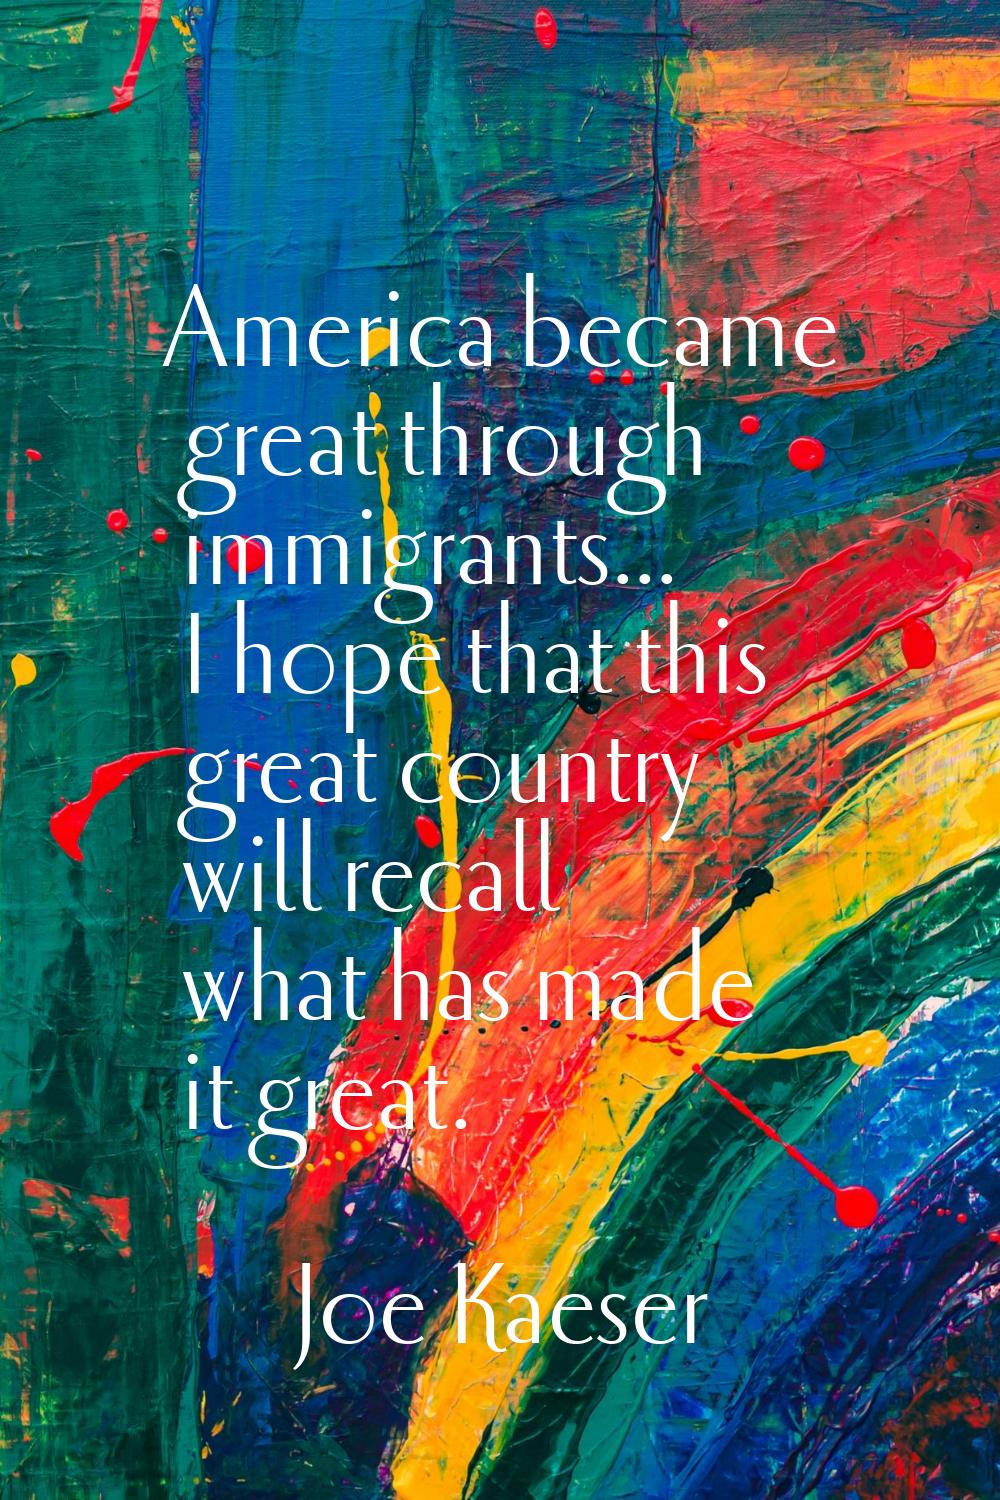 America became great through immigrants... I hope that this great country will recall what has made